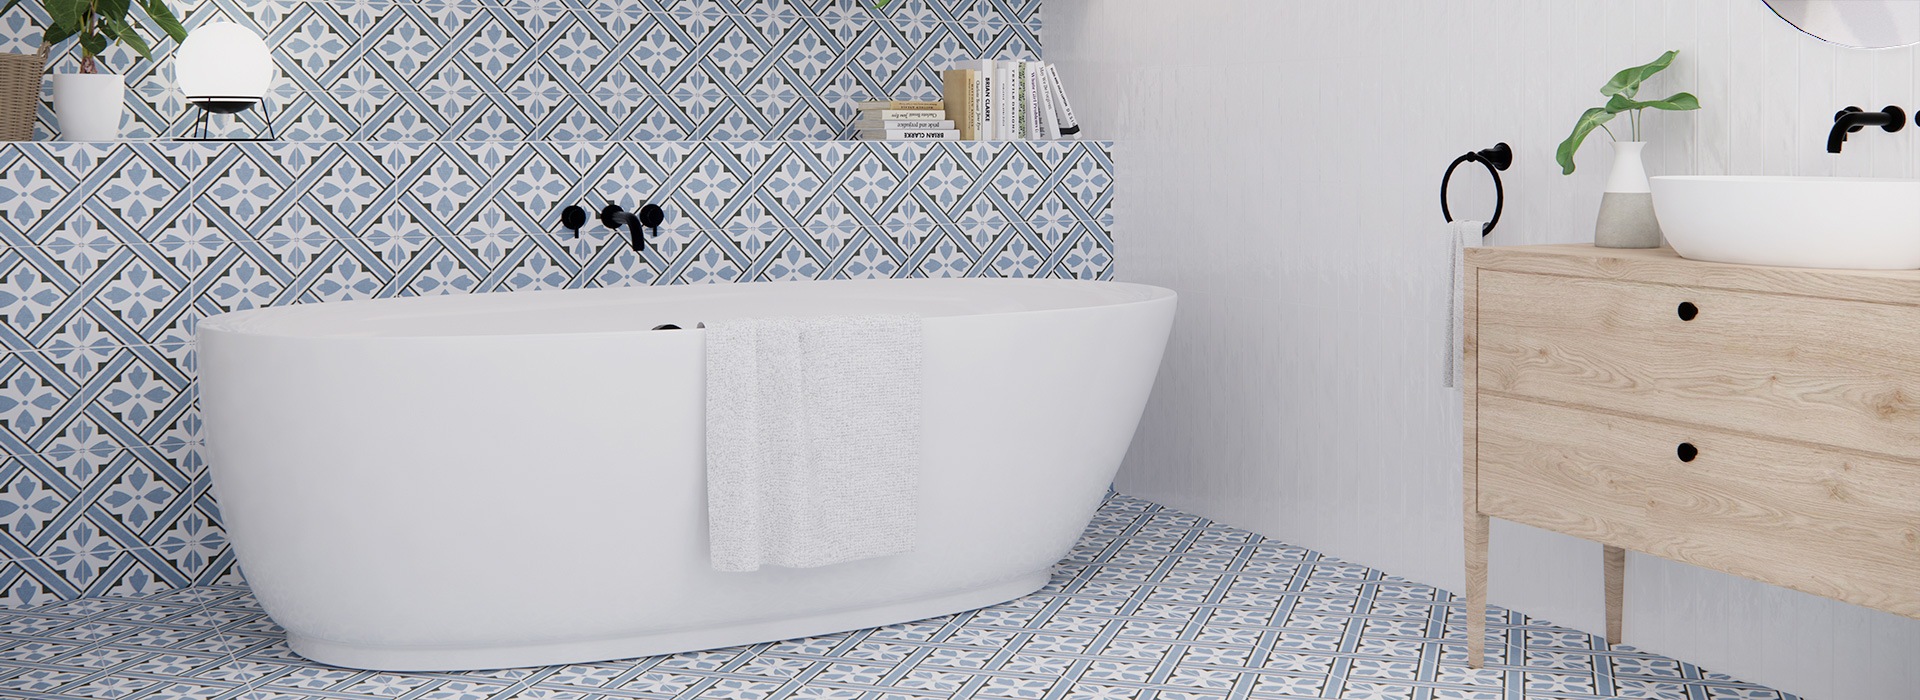 Italtile’s New Howard Blue Porcelain Patchworks, “Made with Love” by Prissmacer Ceramica.